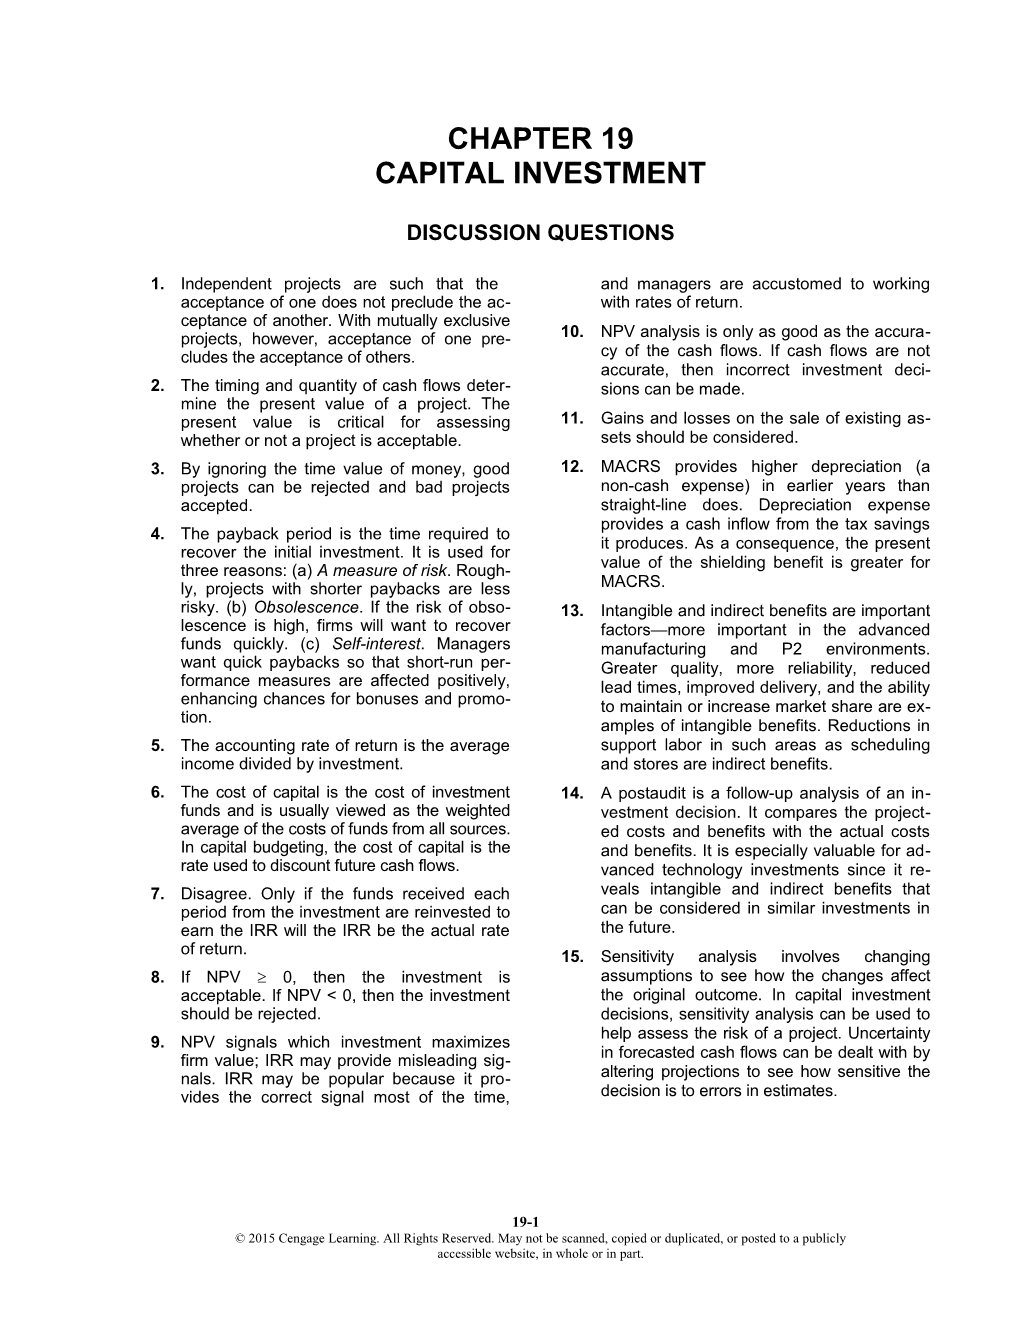 Chapter 23: Capital Investment